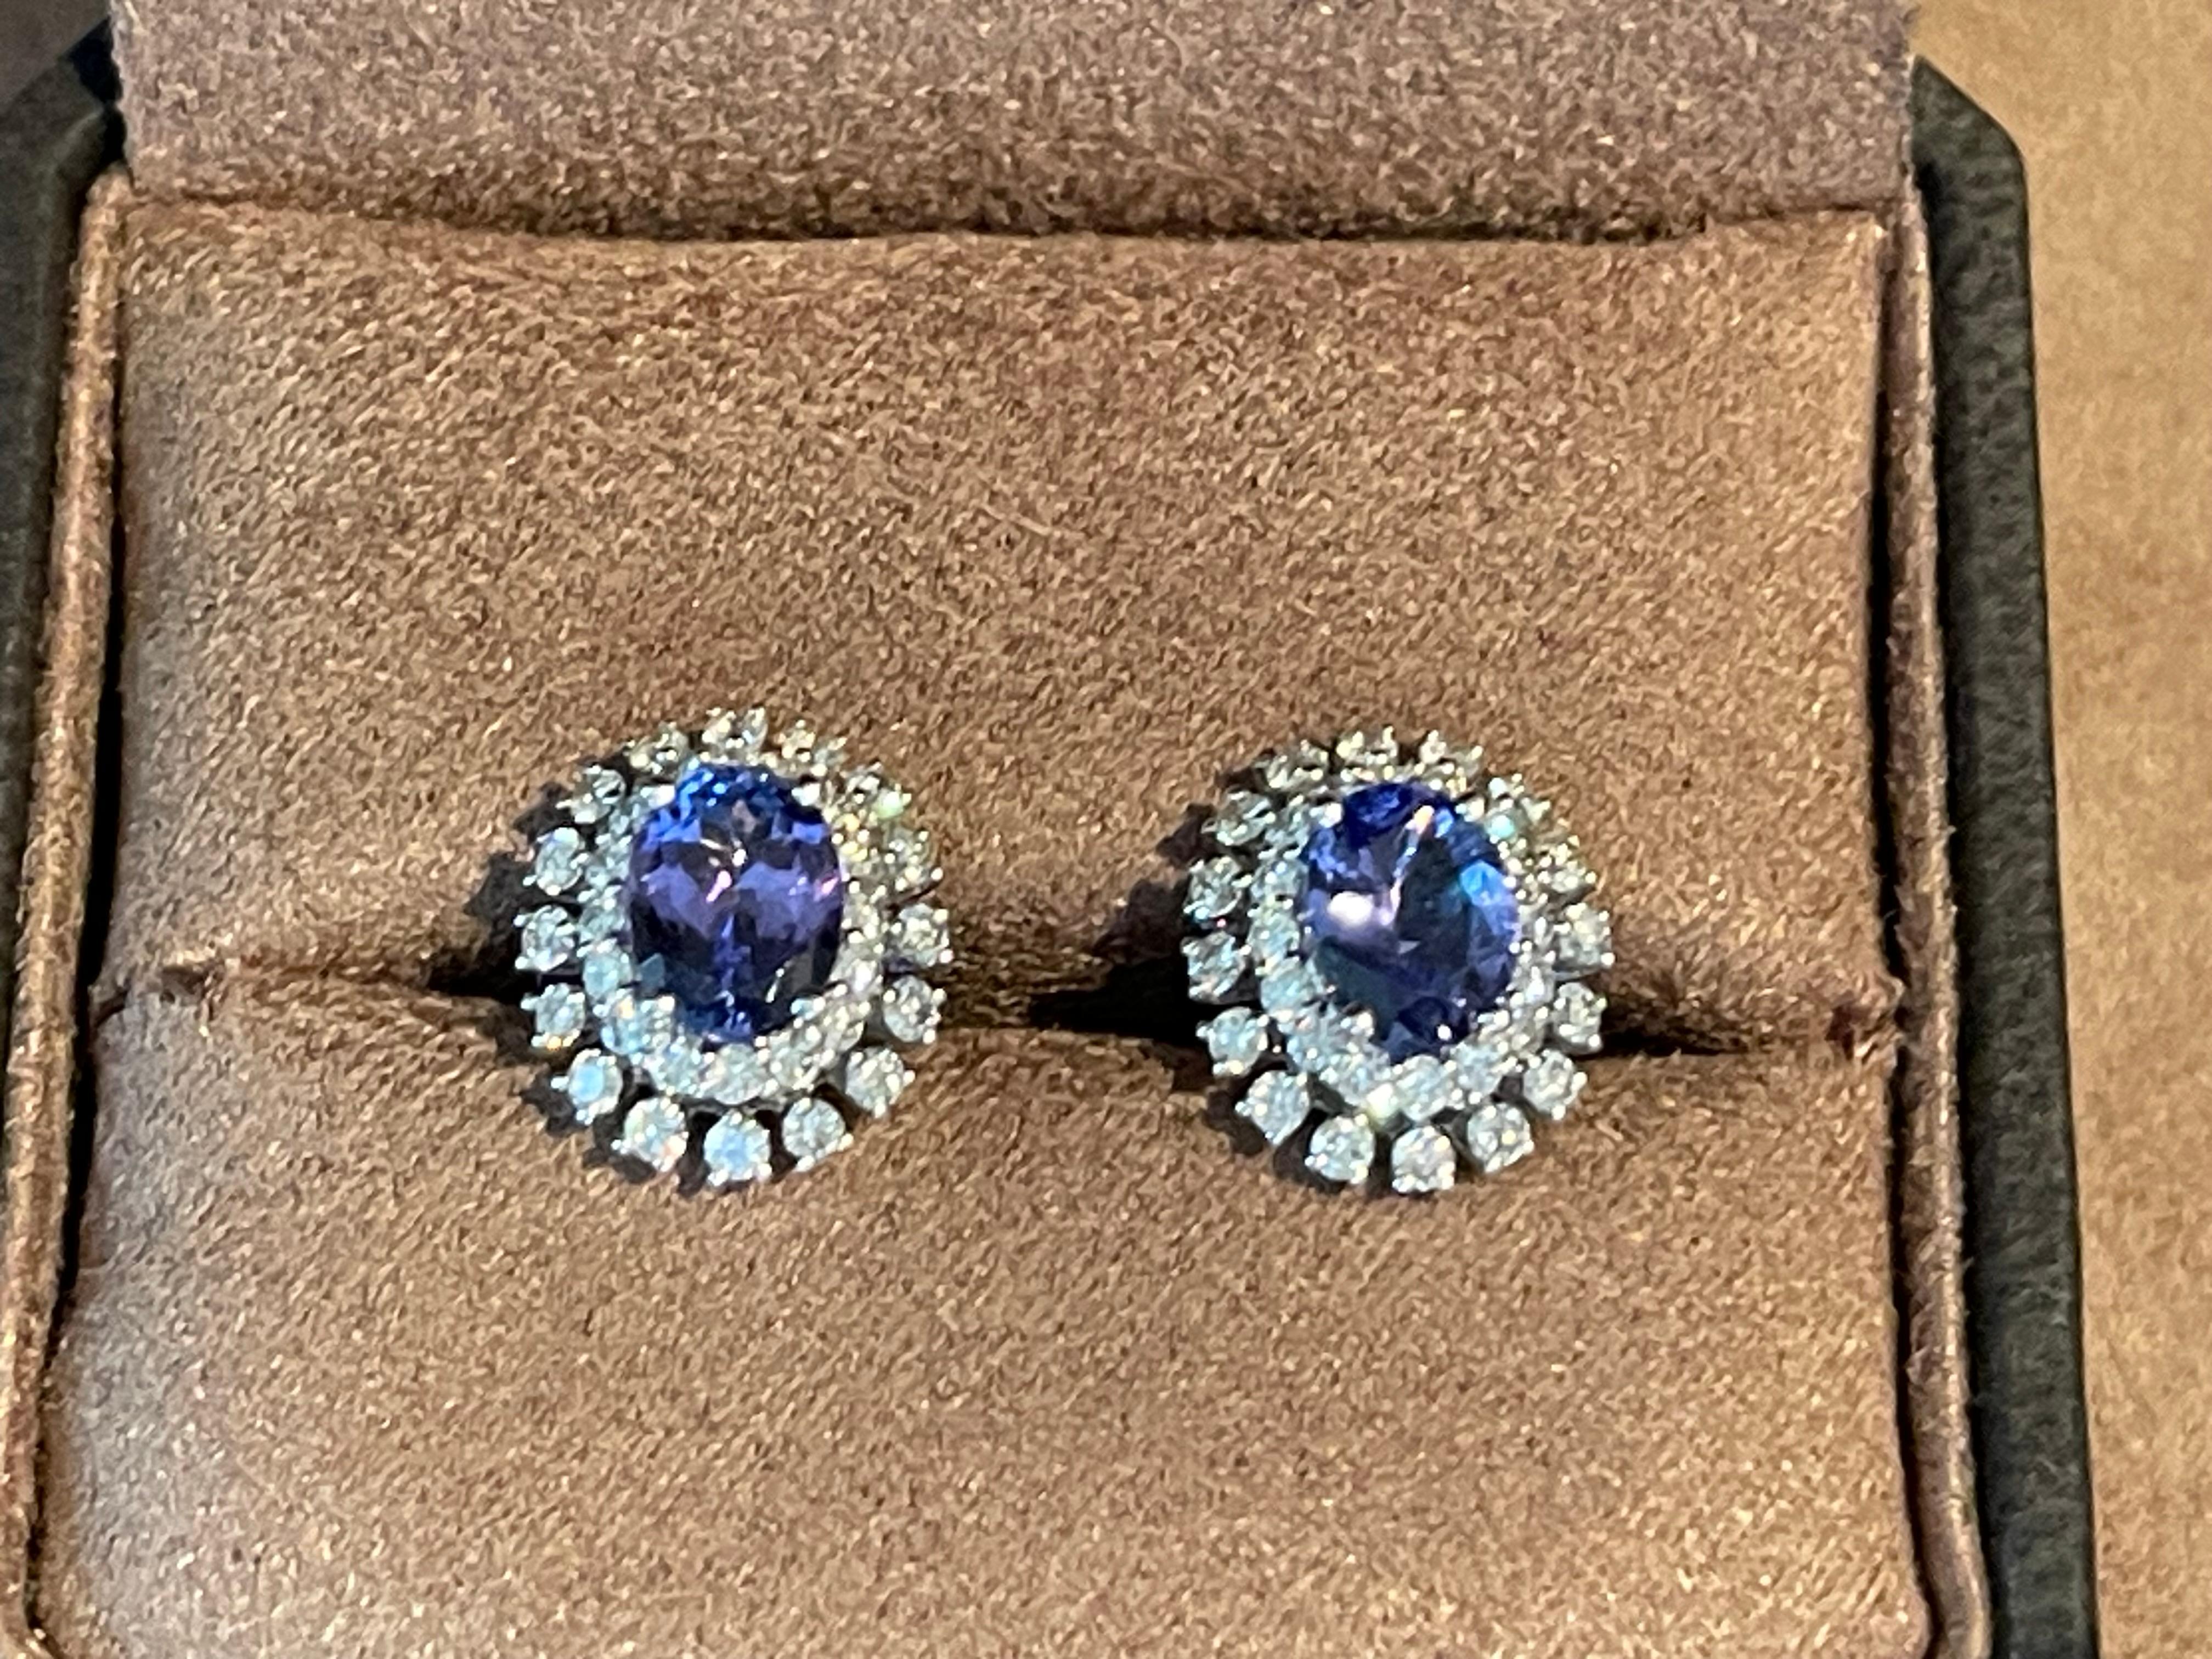 Gorgeous 18 K white Gold earrings featuring 2 oval Tanzanites weighing 2.69 ct in a double halo design, set with 64 brilliant cut Diamonds weighing 1.19 ct. Earrings have post backs, with 18 K white Gold butterfly clasps. These lovely earstuds will